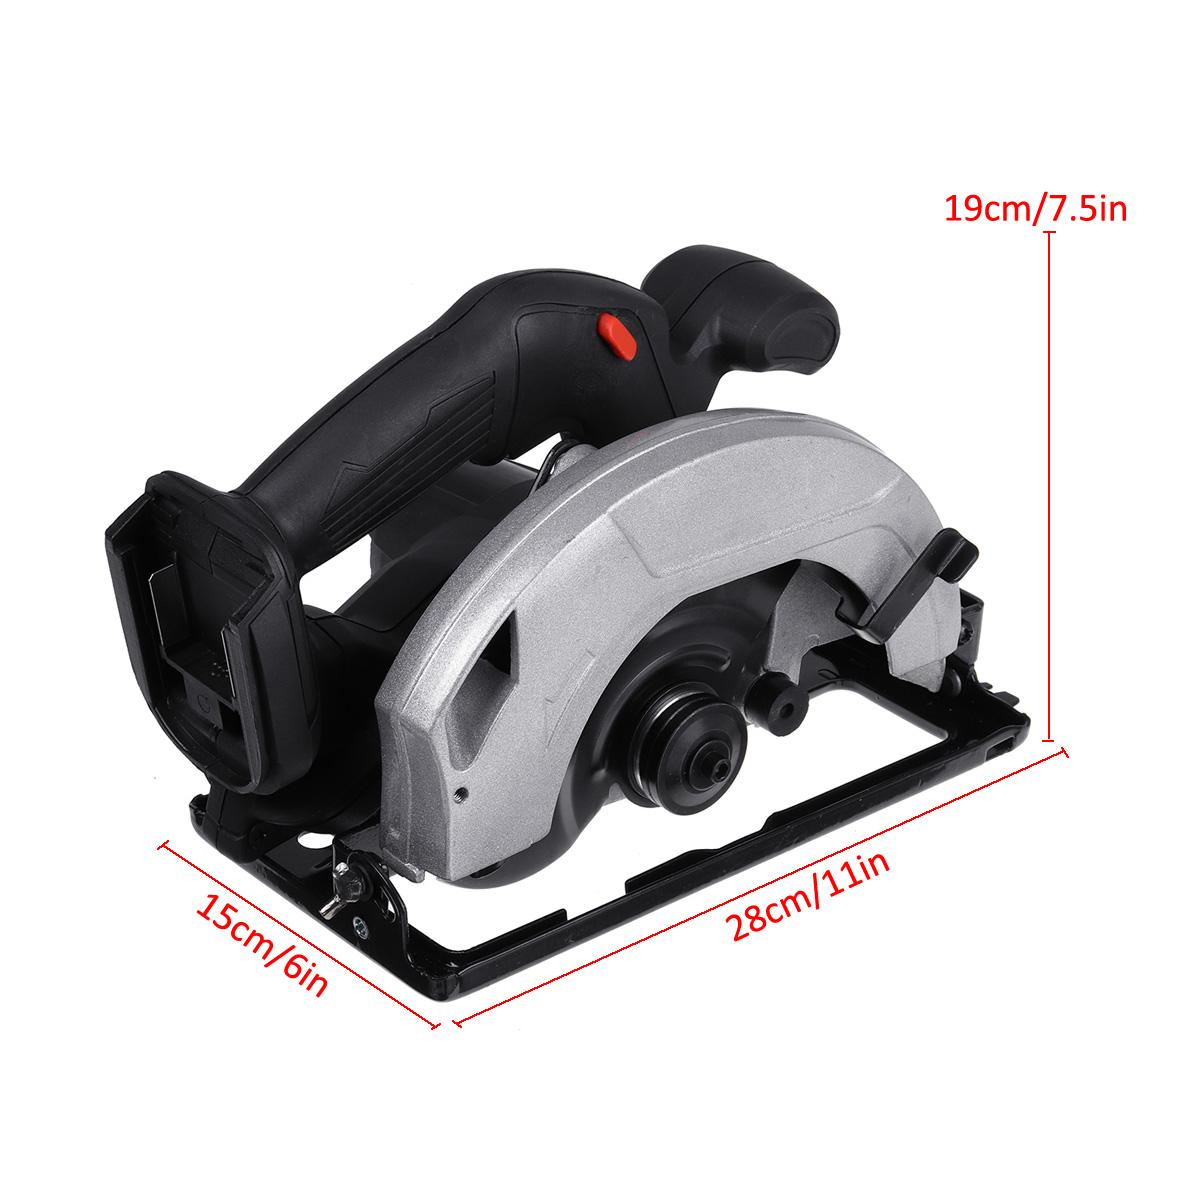 Drillpro-190mm-Electric-Laser-Circular-Saw-Corded-Cutting-Tool-For-Makita-18V-Lithium-Battery-1734554-4